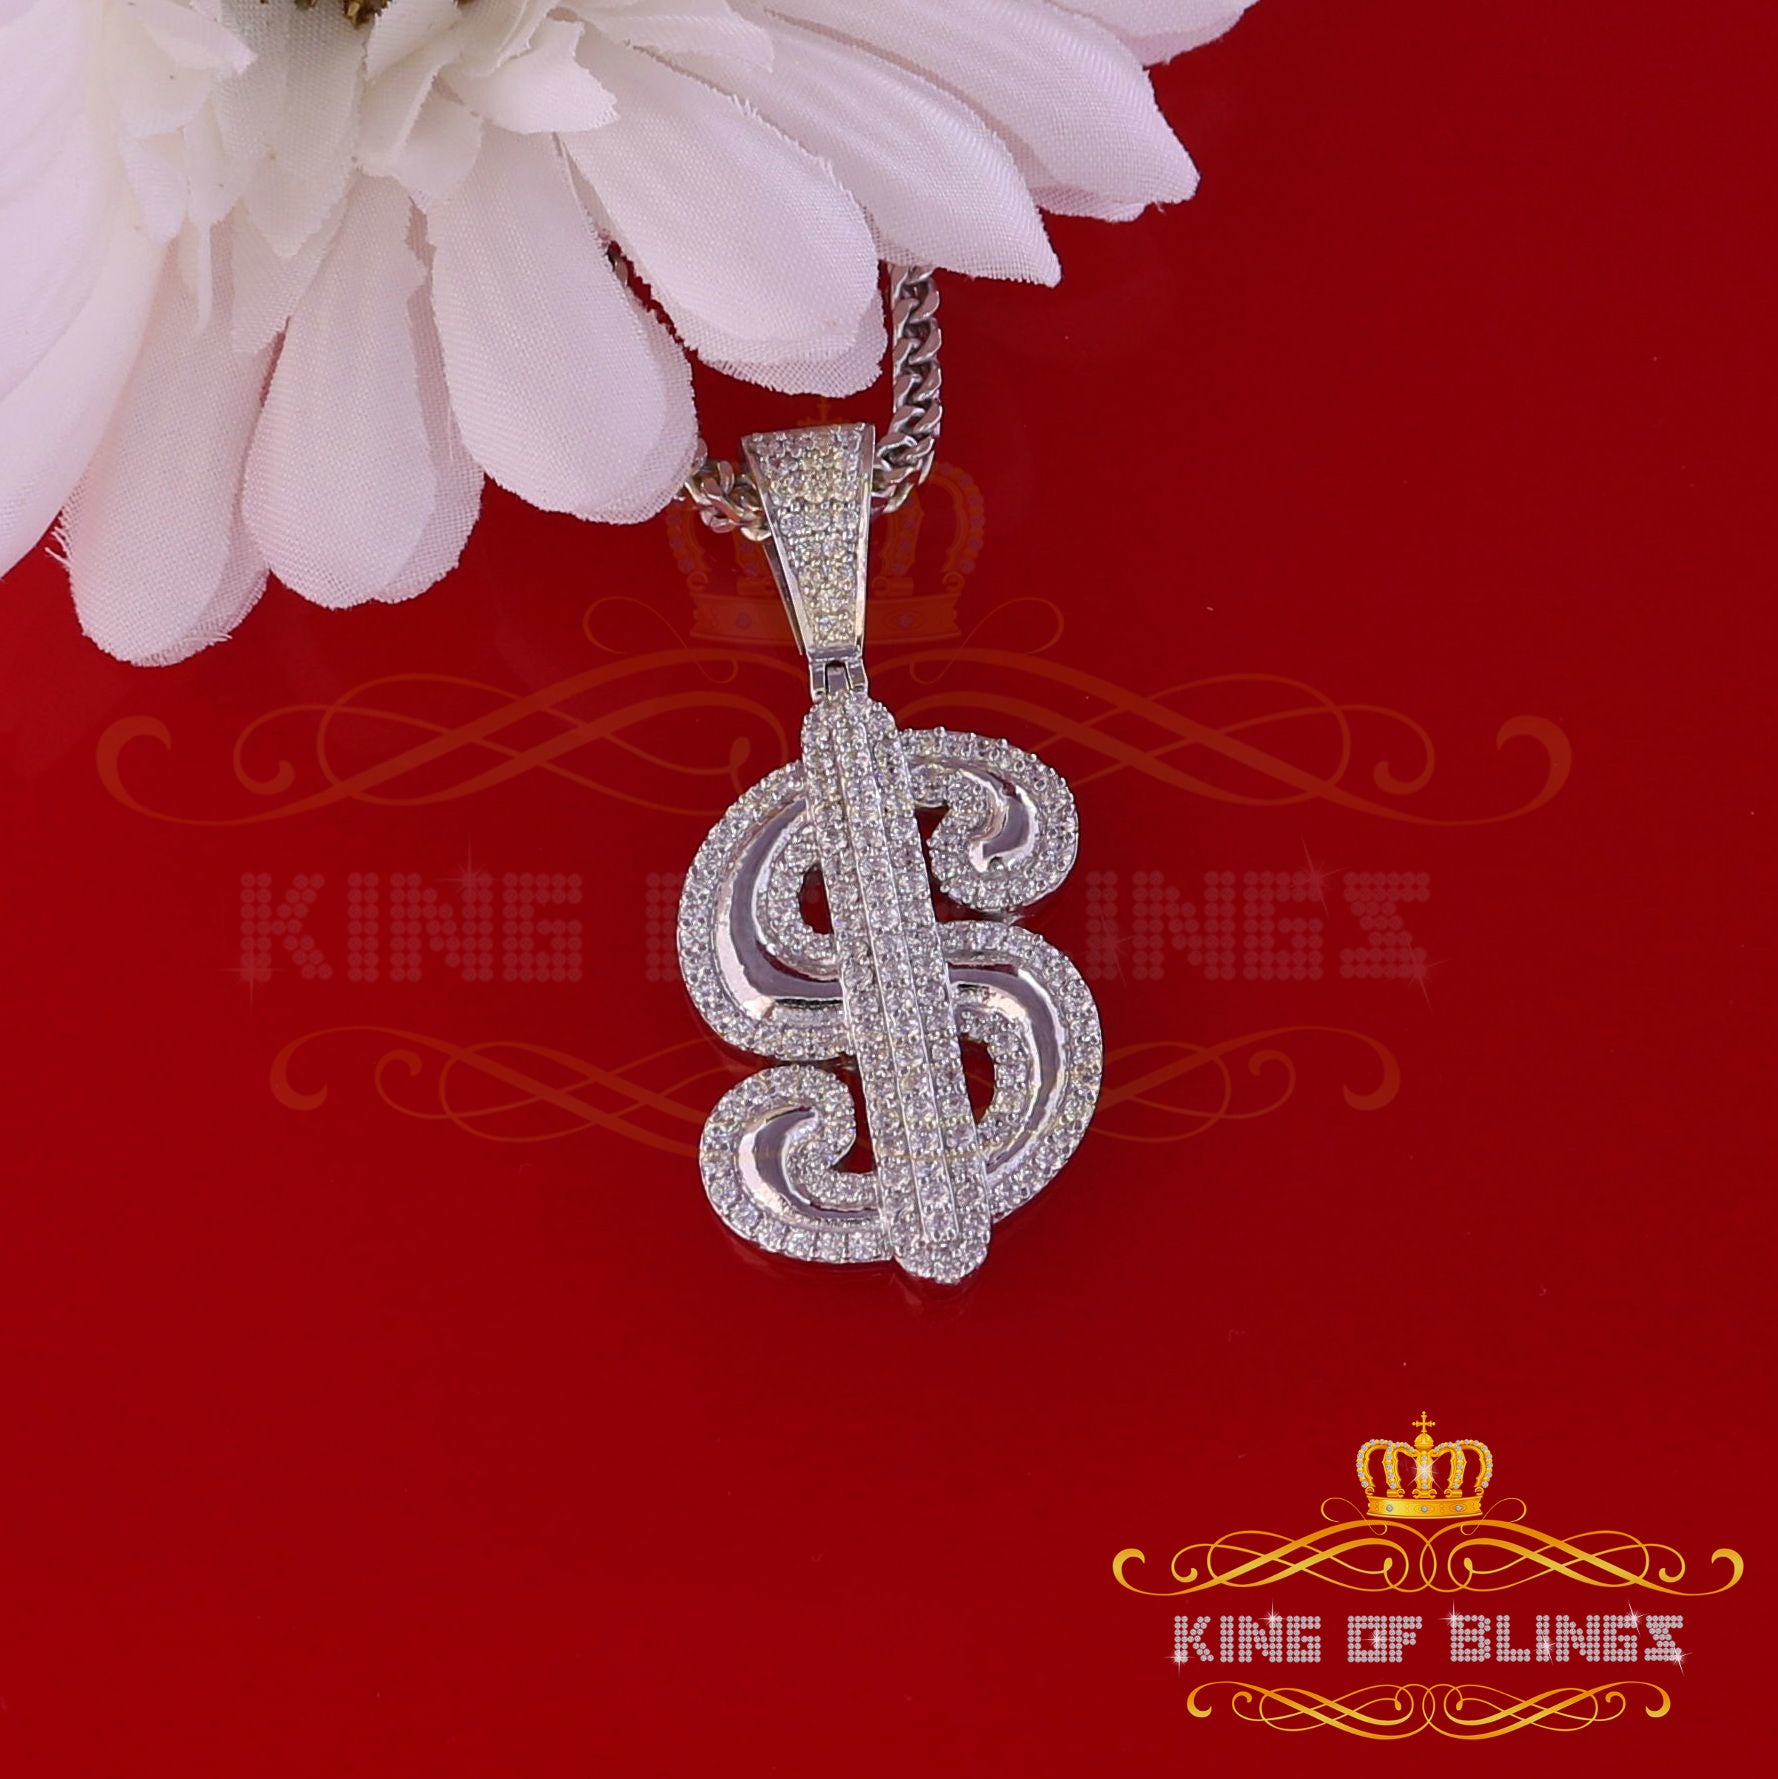 White 925 Sterling Silver Dollar Sign Pendant with 3.05ct Cubic Zirconia Stone KING OF BLINGS